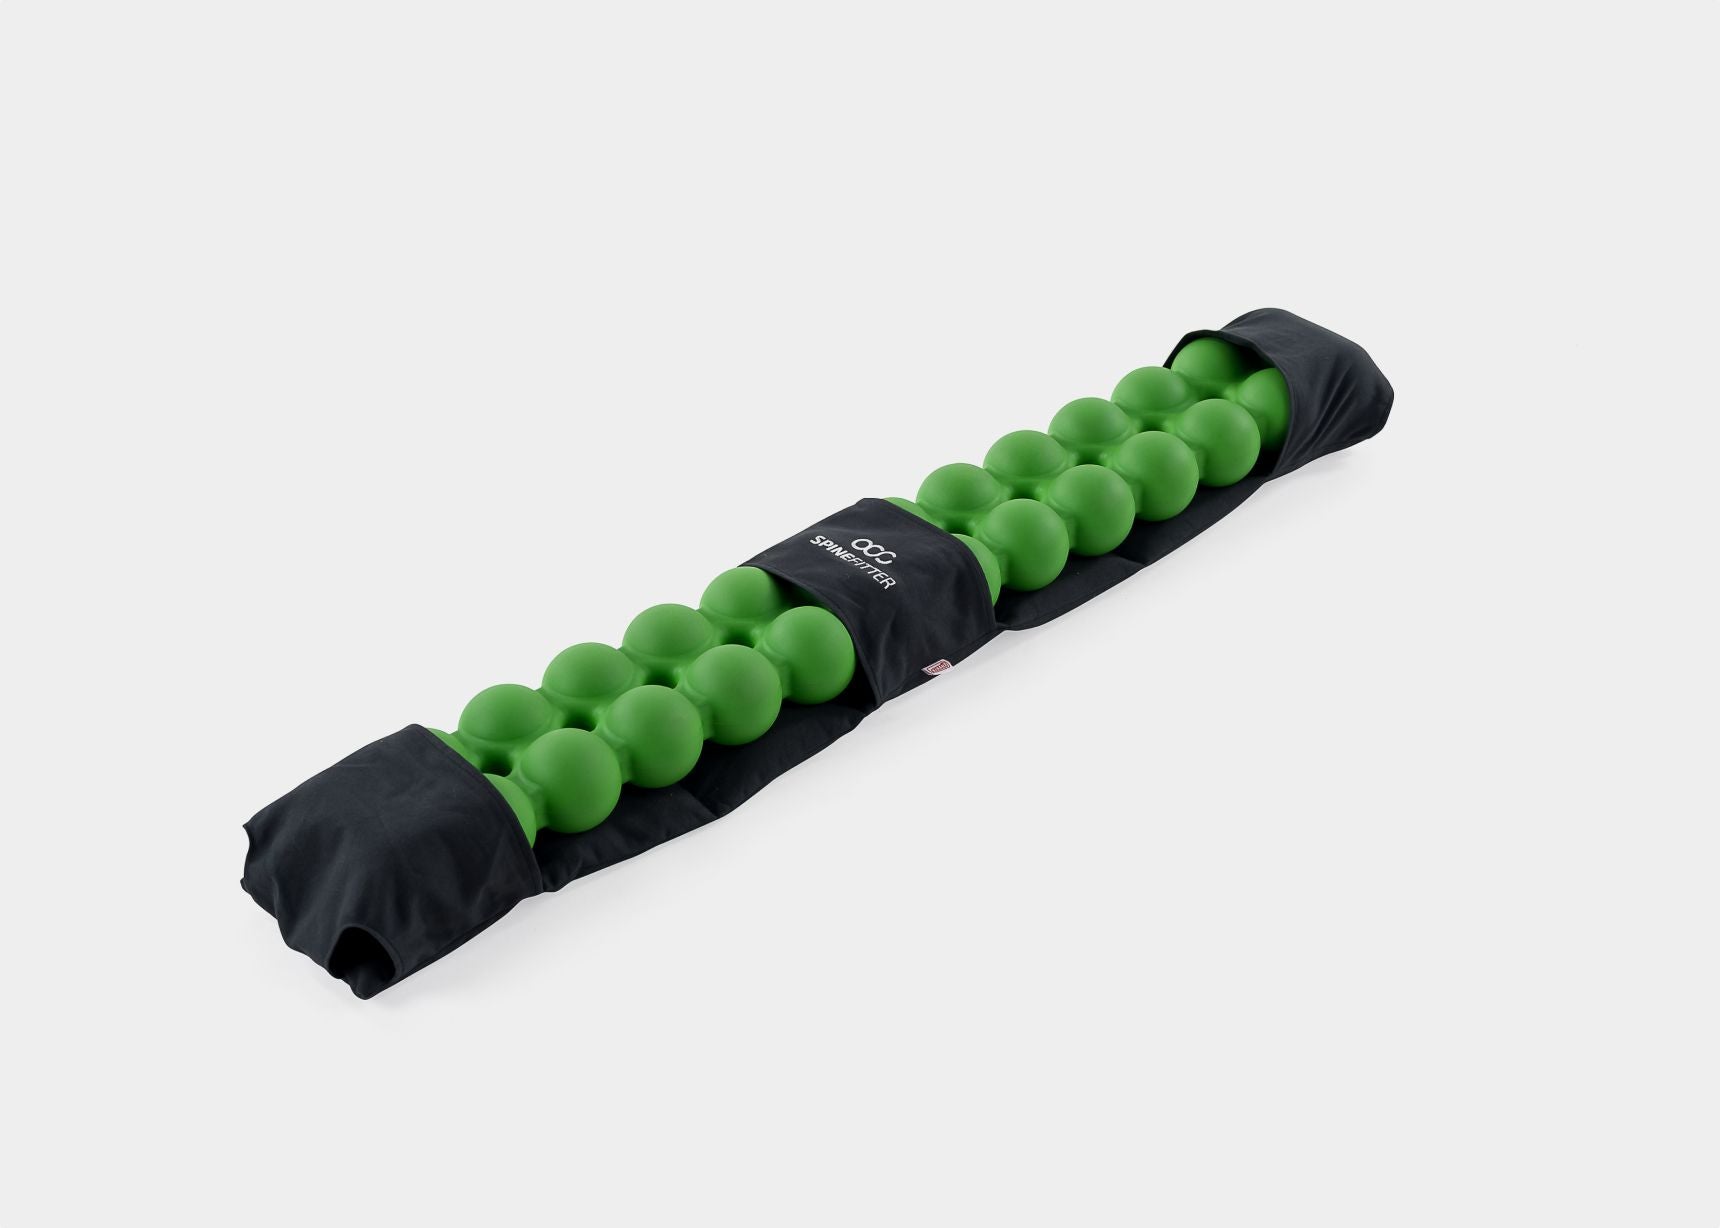 Green Spinefitter and Linum kit for physical therapy.